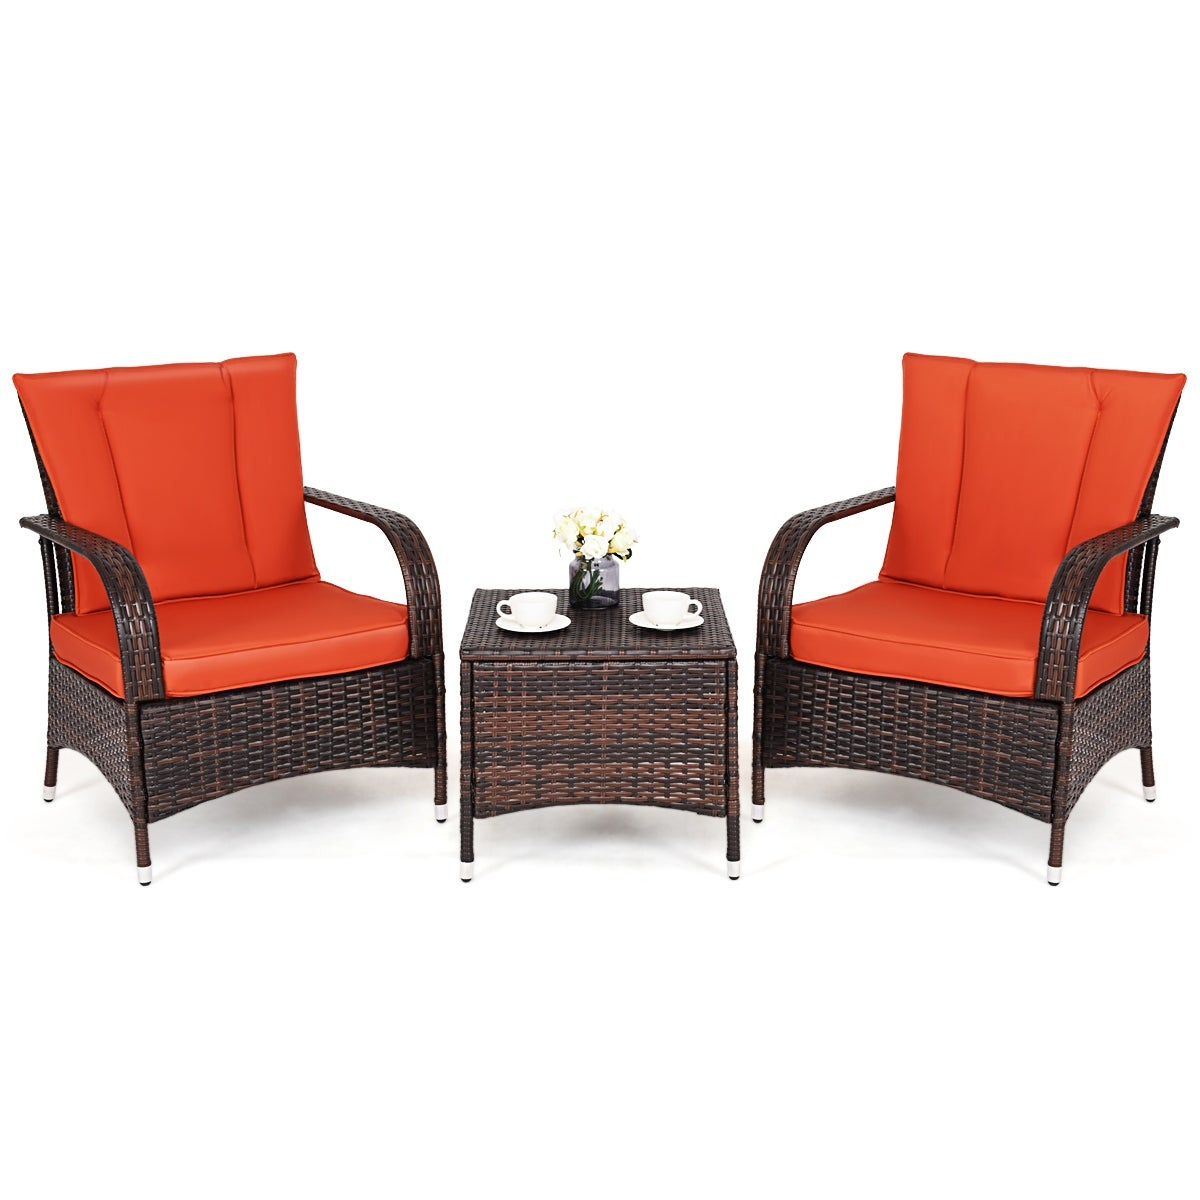 Costway 3pcs Outdoor Patio Mix Brown Rattan Wicker Furniture Set Seat Cushioned Orange pertaining to dimensions 1200 X 1200